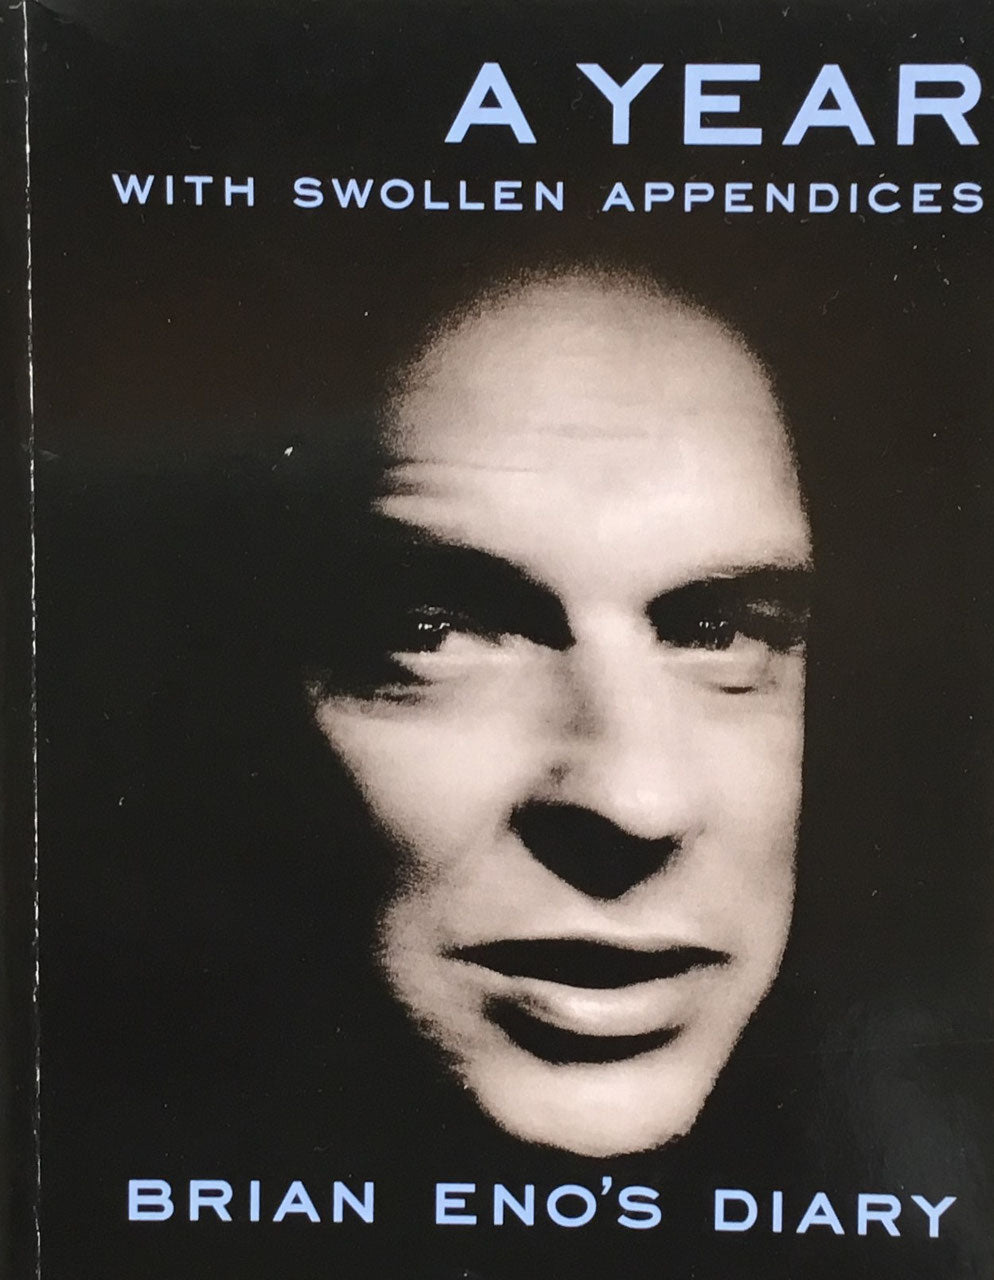 A YEAR　WITH SWOLLEN APPENDICES　BRIAN ENO'S DIARY　Brian Eno